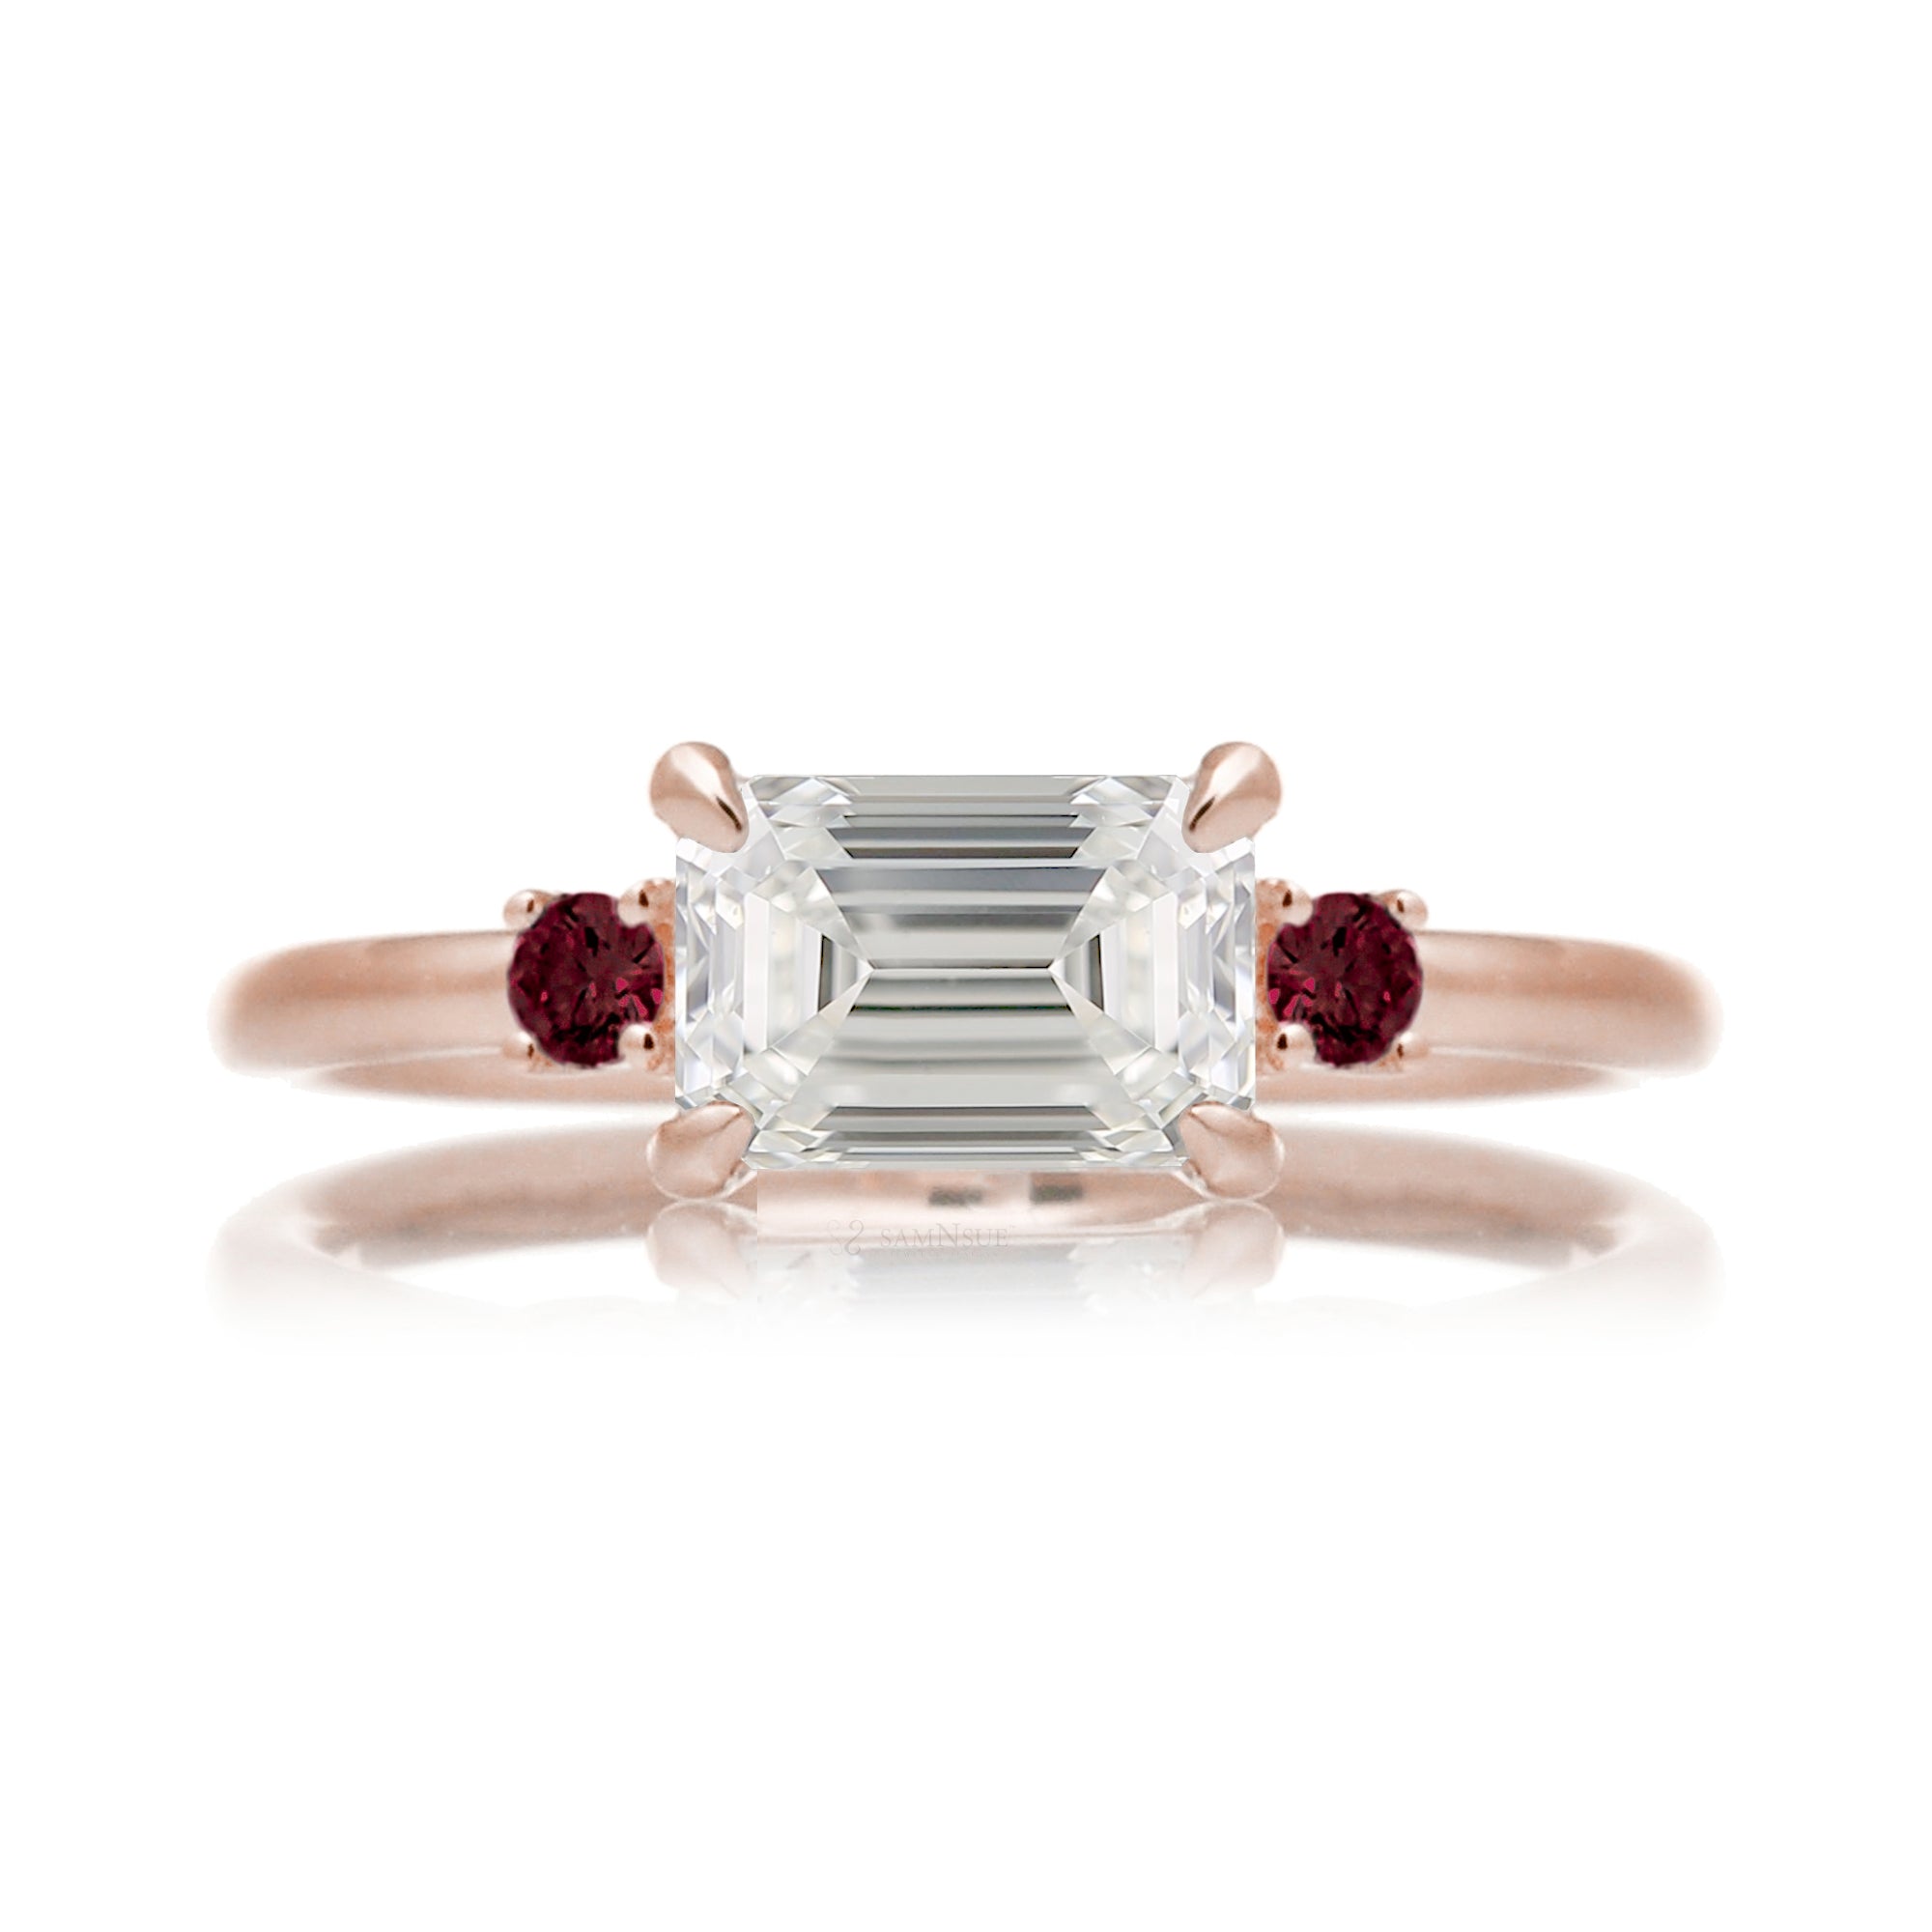 east-west emerald cut diamond three stone ring the Lena with side red rubies rose gold